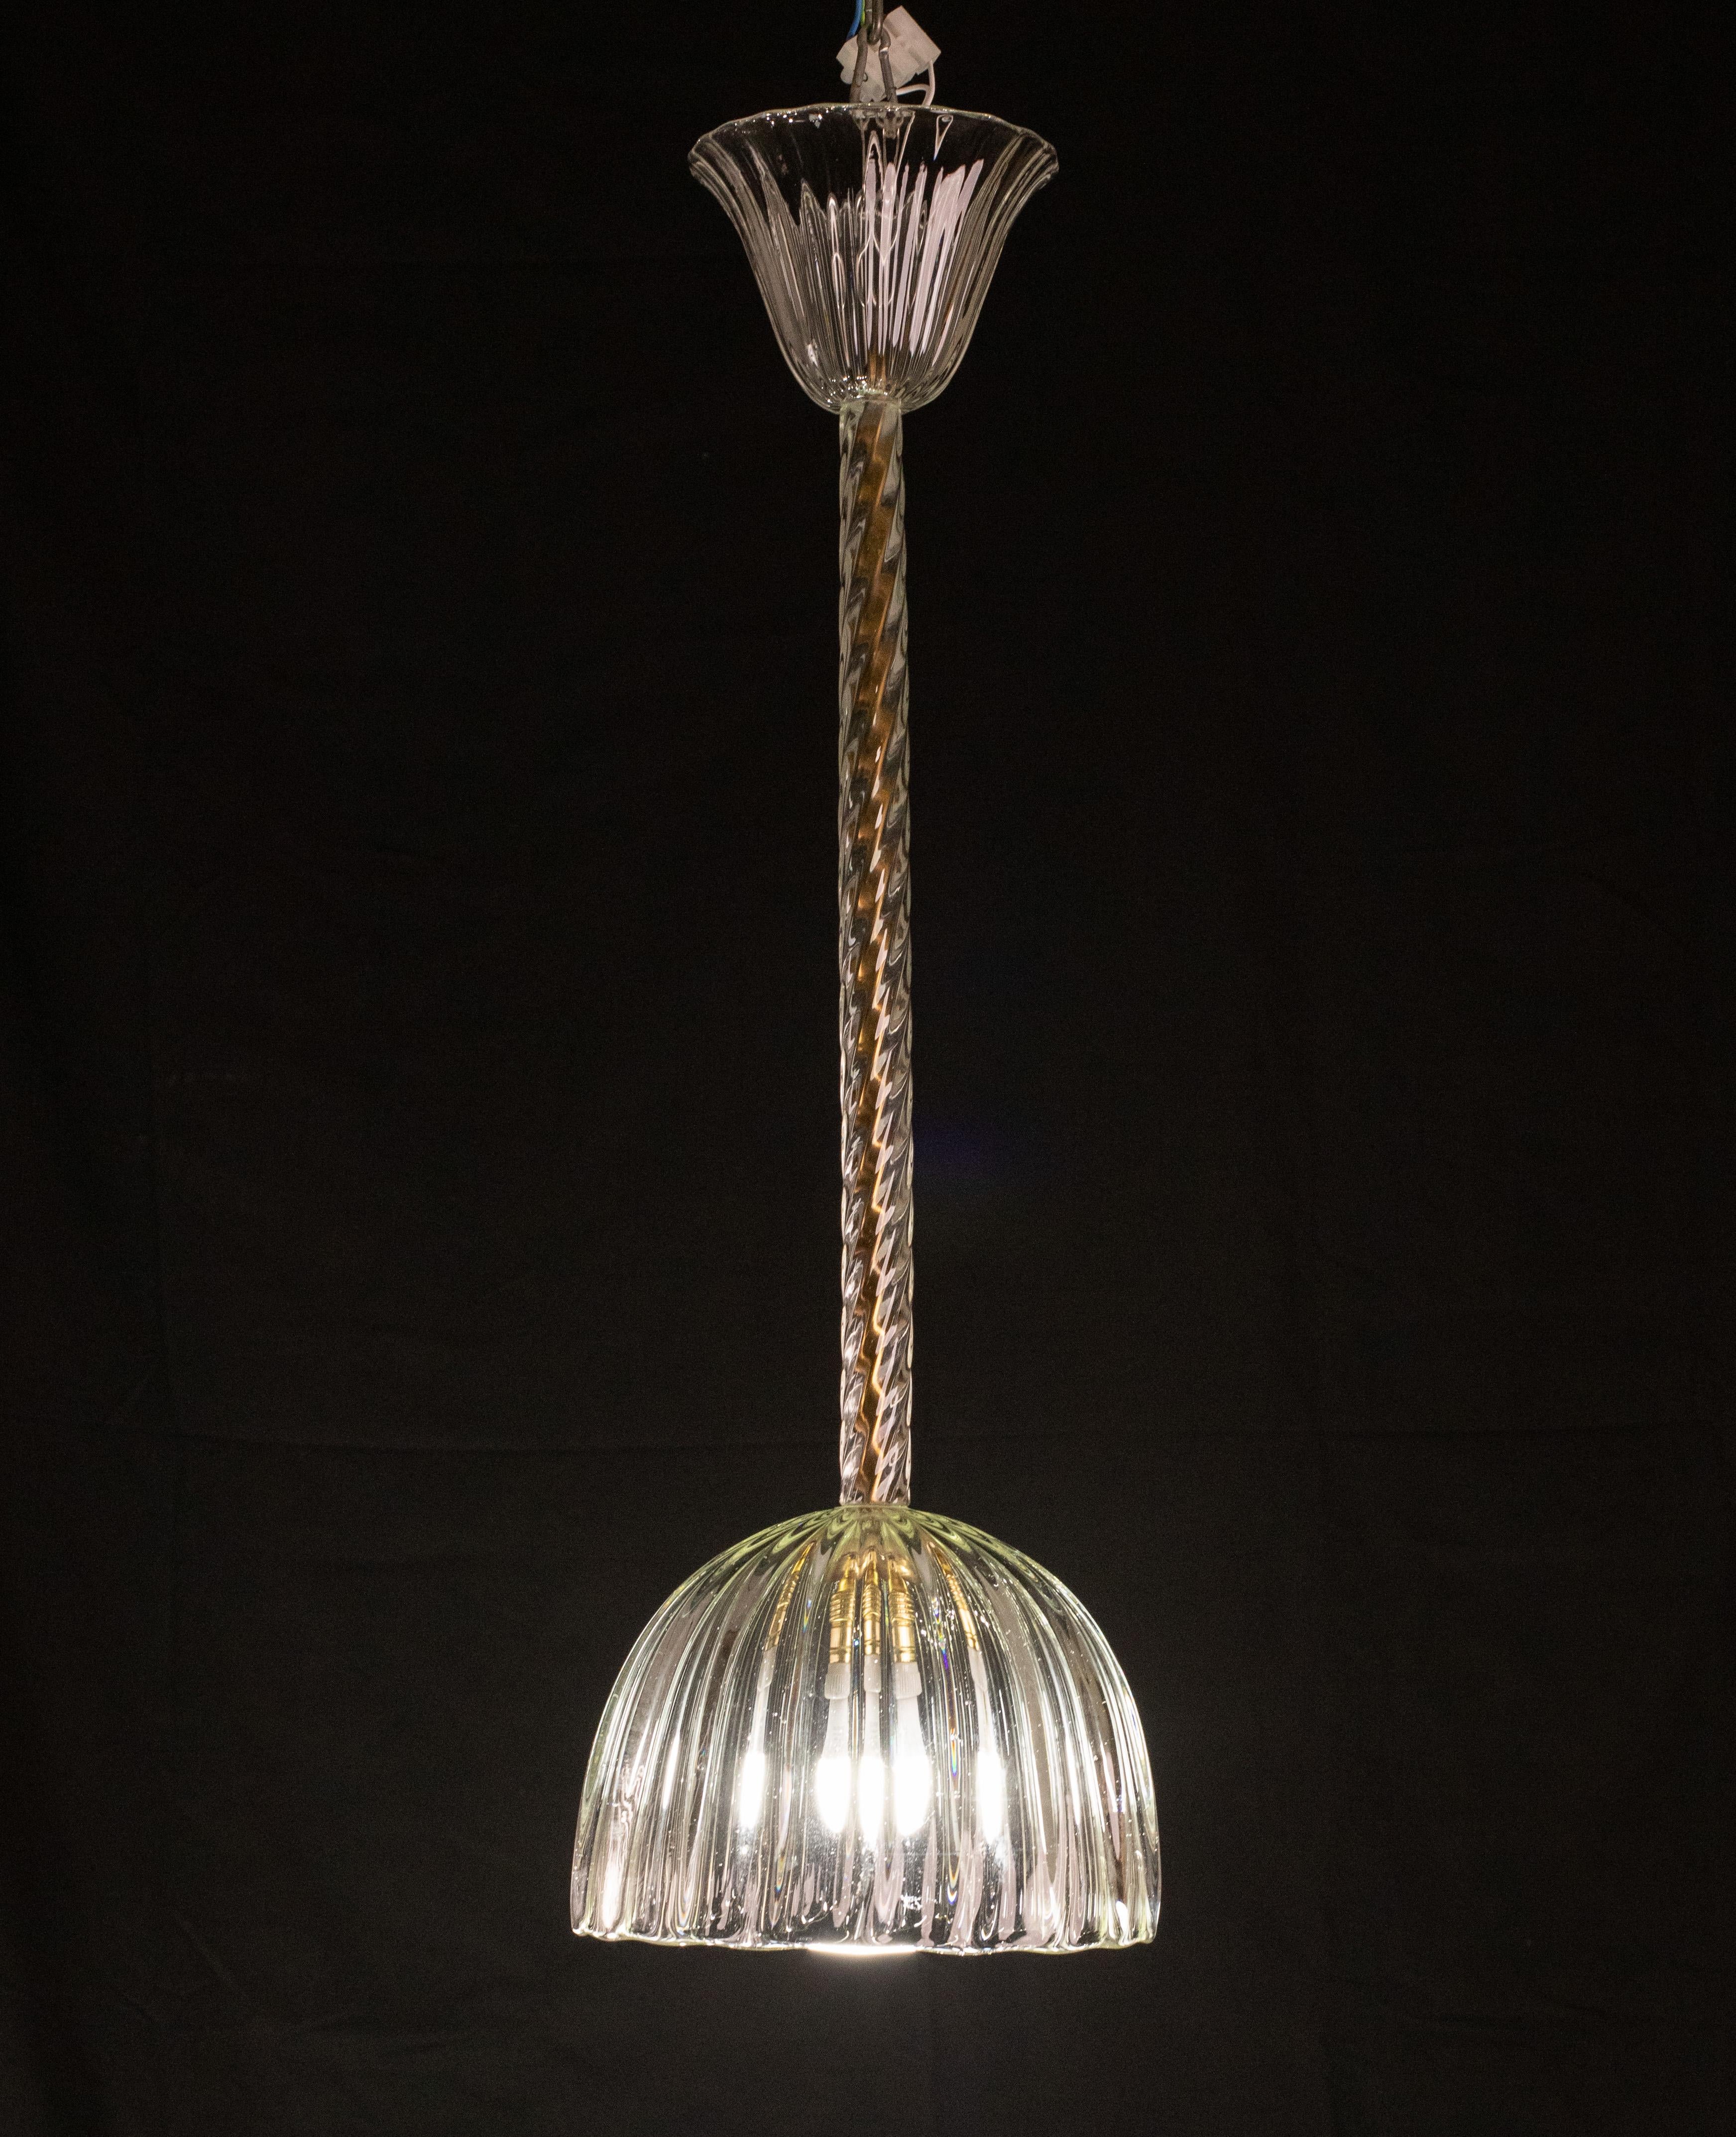 Murano lantern attributed to the Barovier and Toso glassworks.

Period 1940 1050.

Art Deco style.

One light e27 European standard, possibility of wiring for USa.

Lantern height 68 cm, diameter 21 cm.